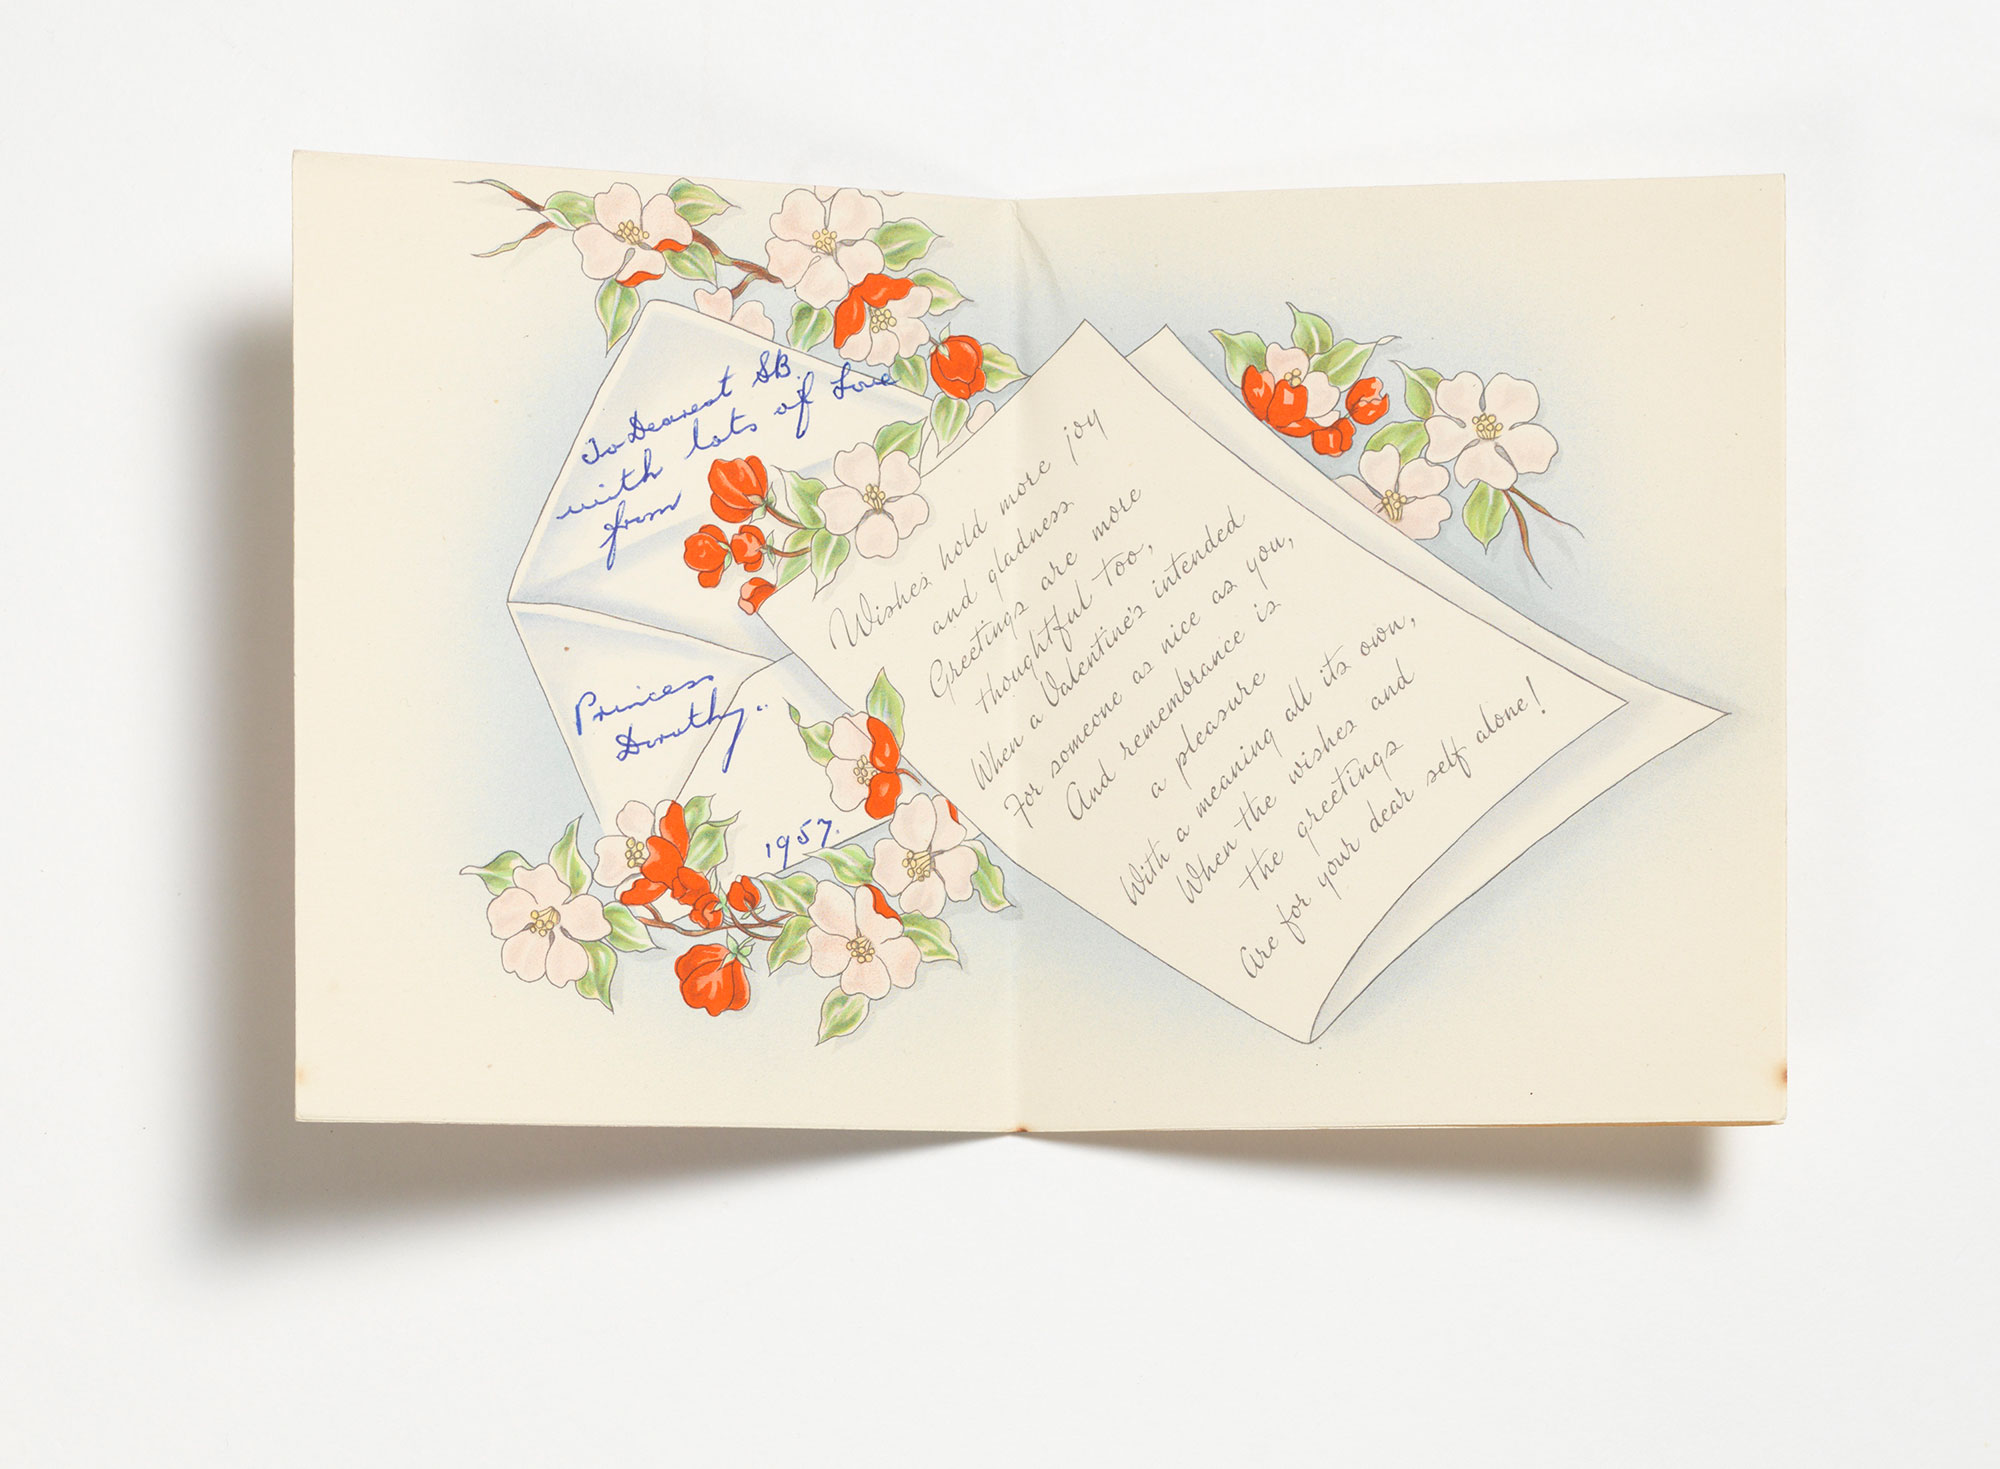 Inside of a Valentine's Day greeting card, with a romantic message on a graphic of a letter.